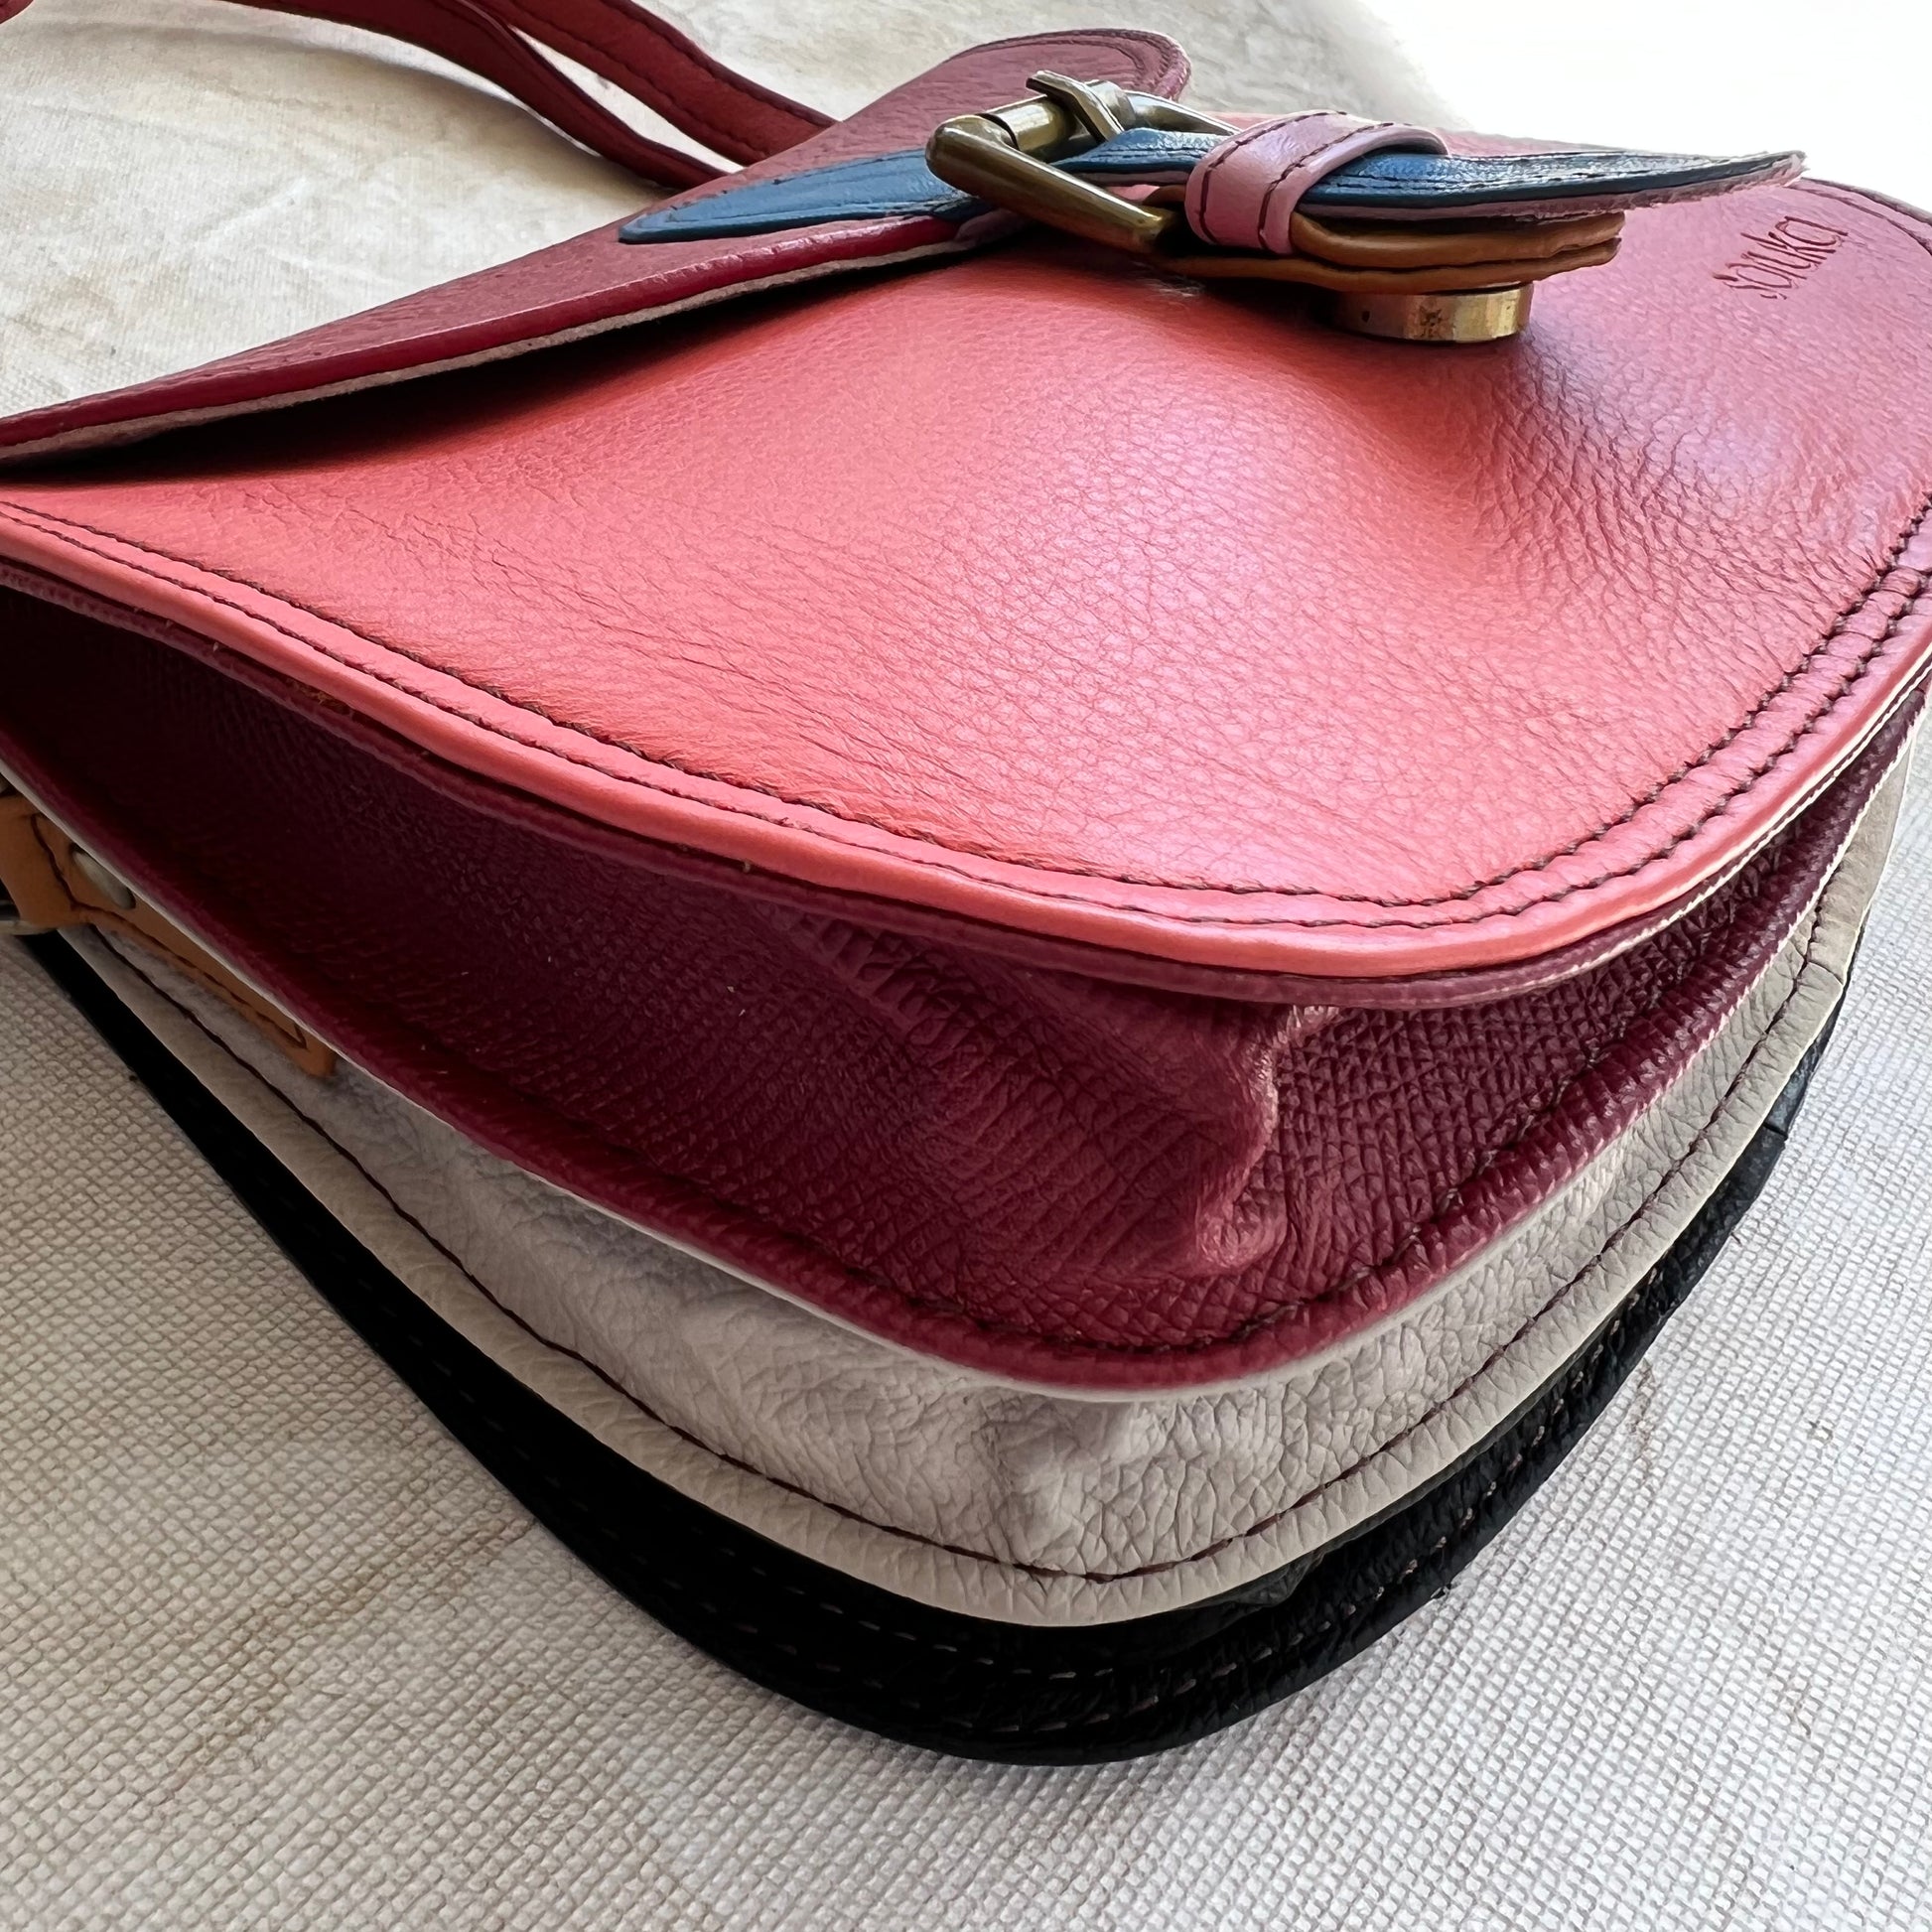 Side view of bag showing 3 gussets.